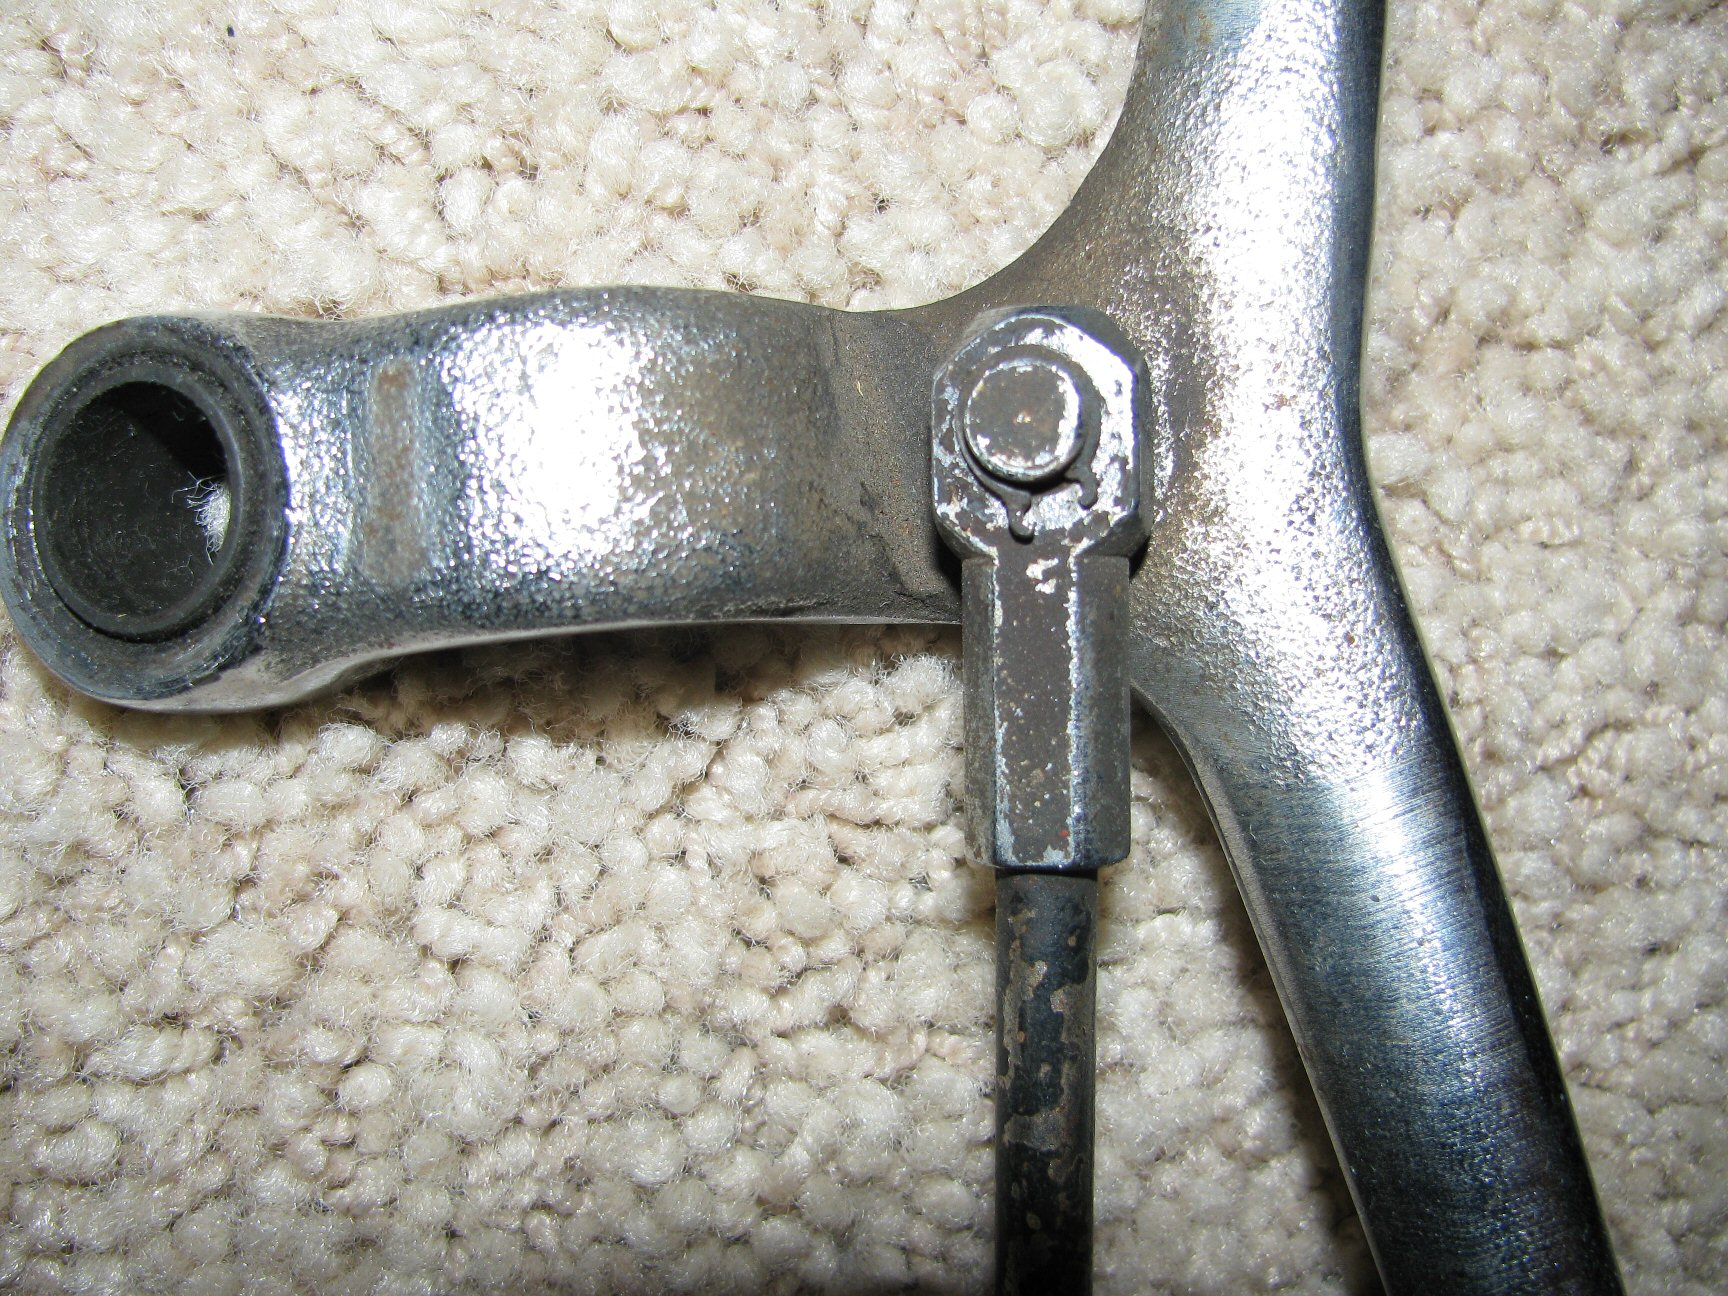 Inside close up of the Tonti frame shift lever.